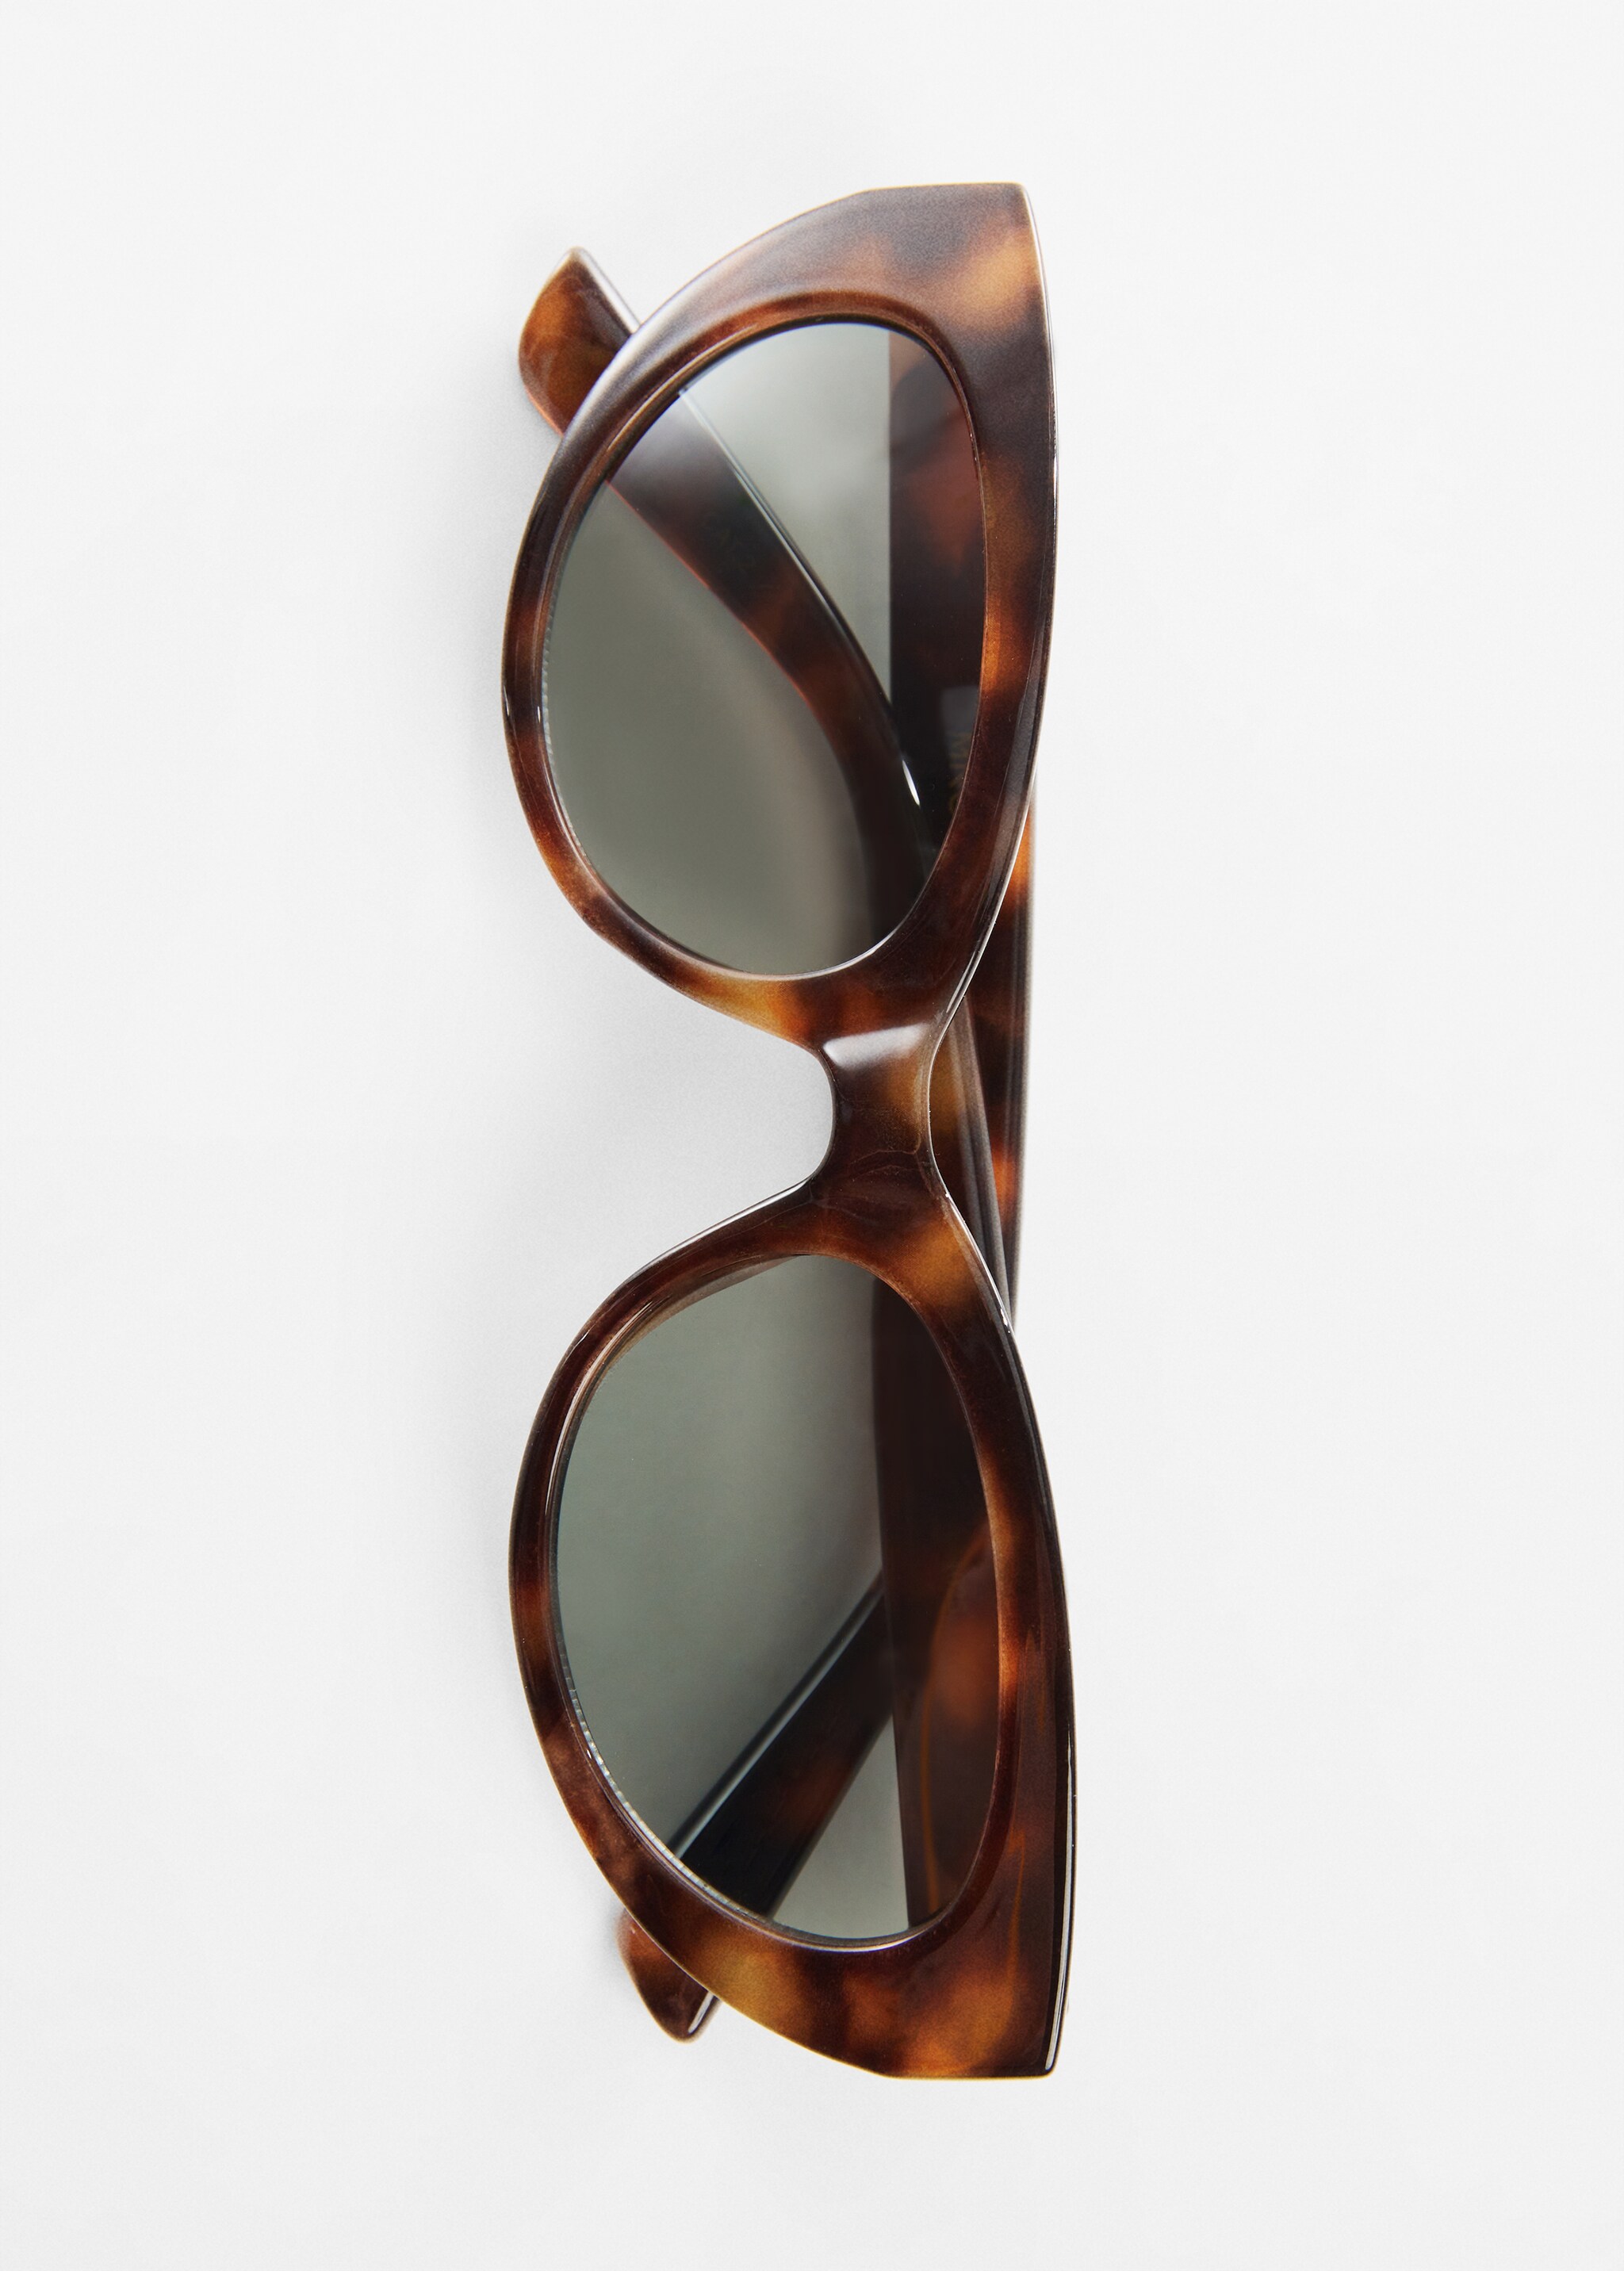 Retro style sunglasses - Details of the article 2